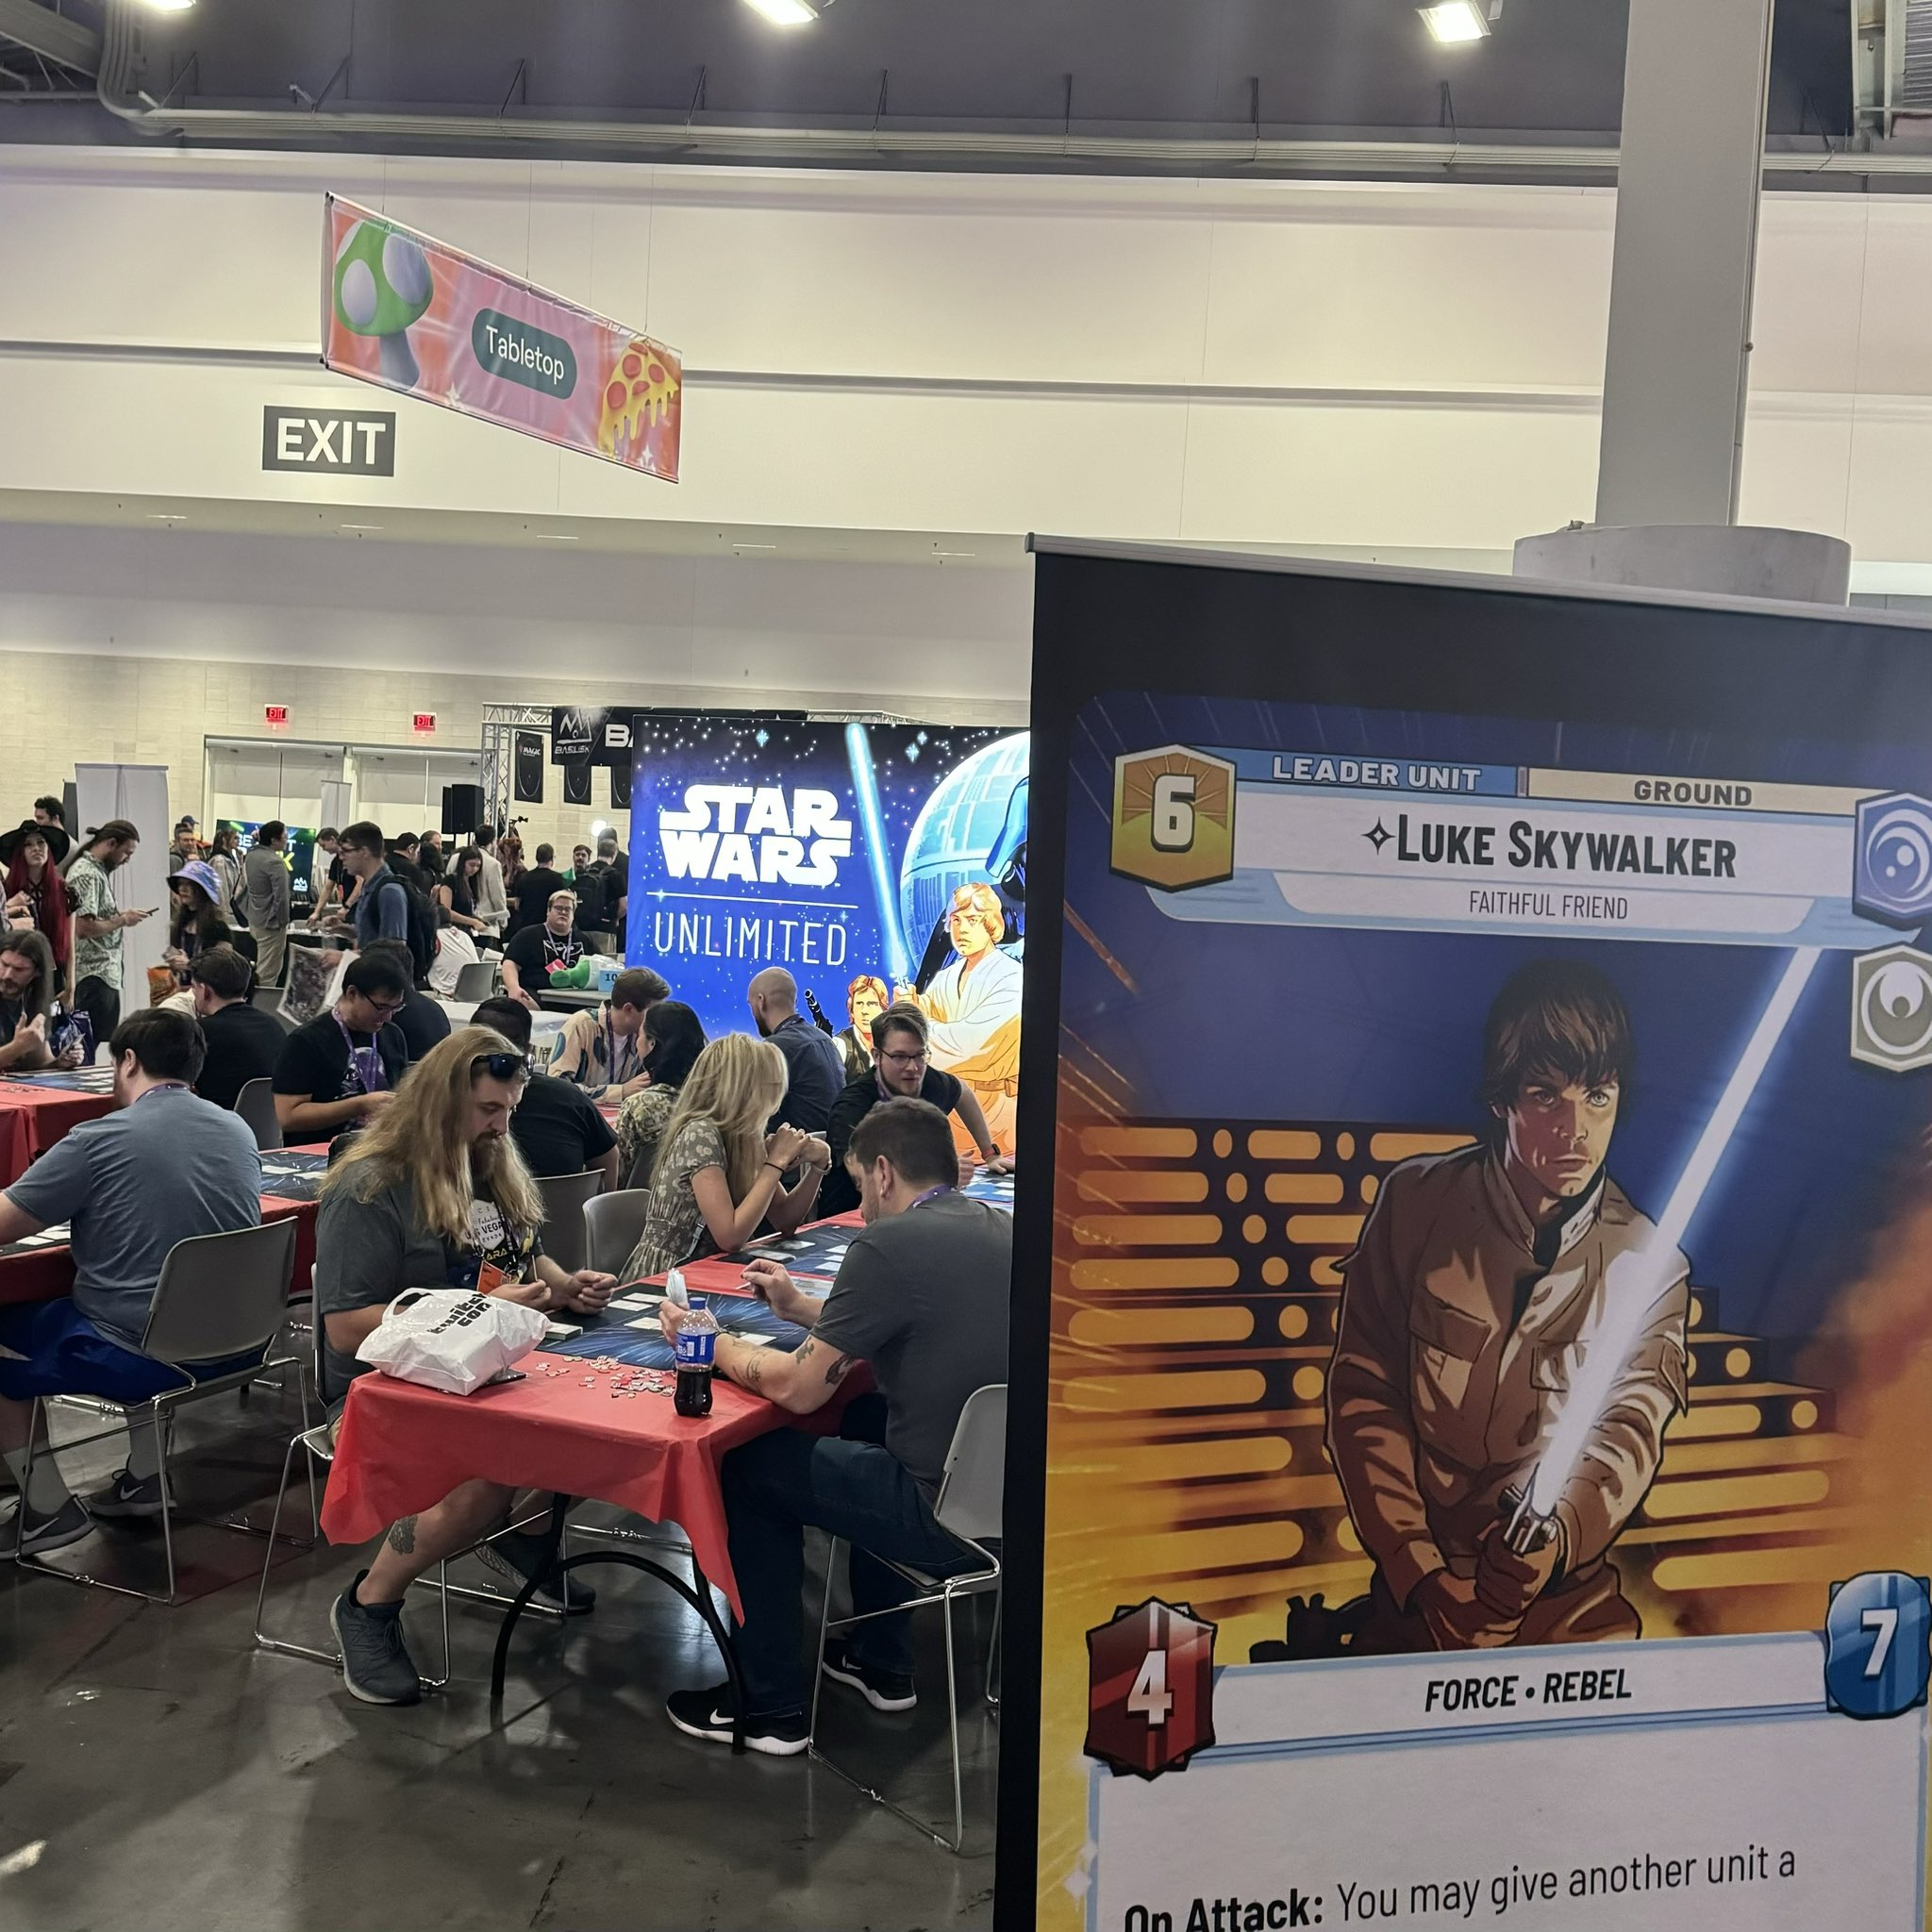 Star Wars: Unlimited by FFG on X: We're wrapping up day 2 of TwitchCon! If  you haven't stopped by yet, we'll have promo cards and a limited number of  playmats available tomorrow